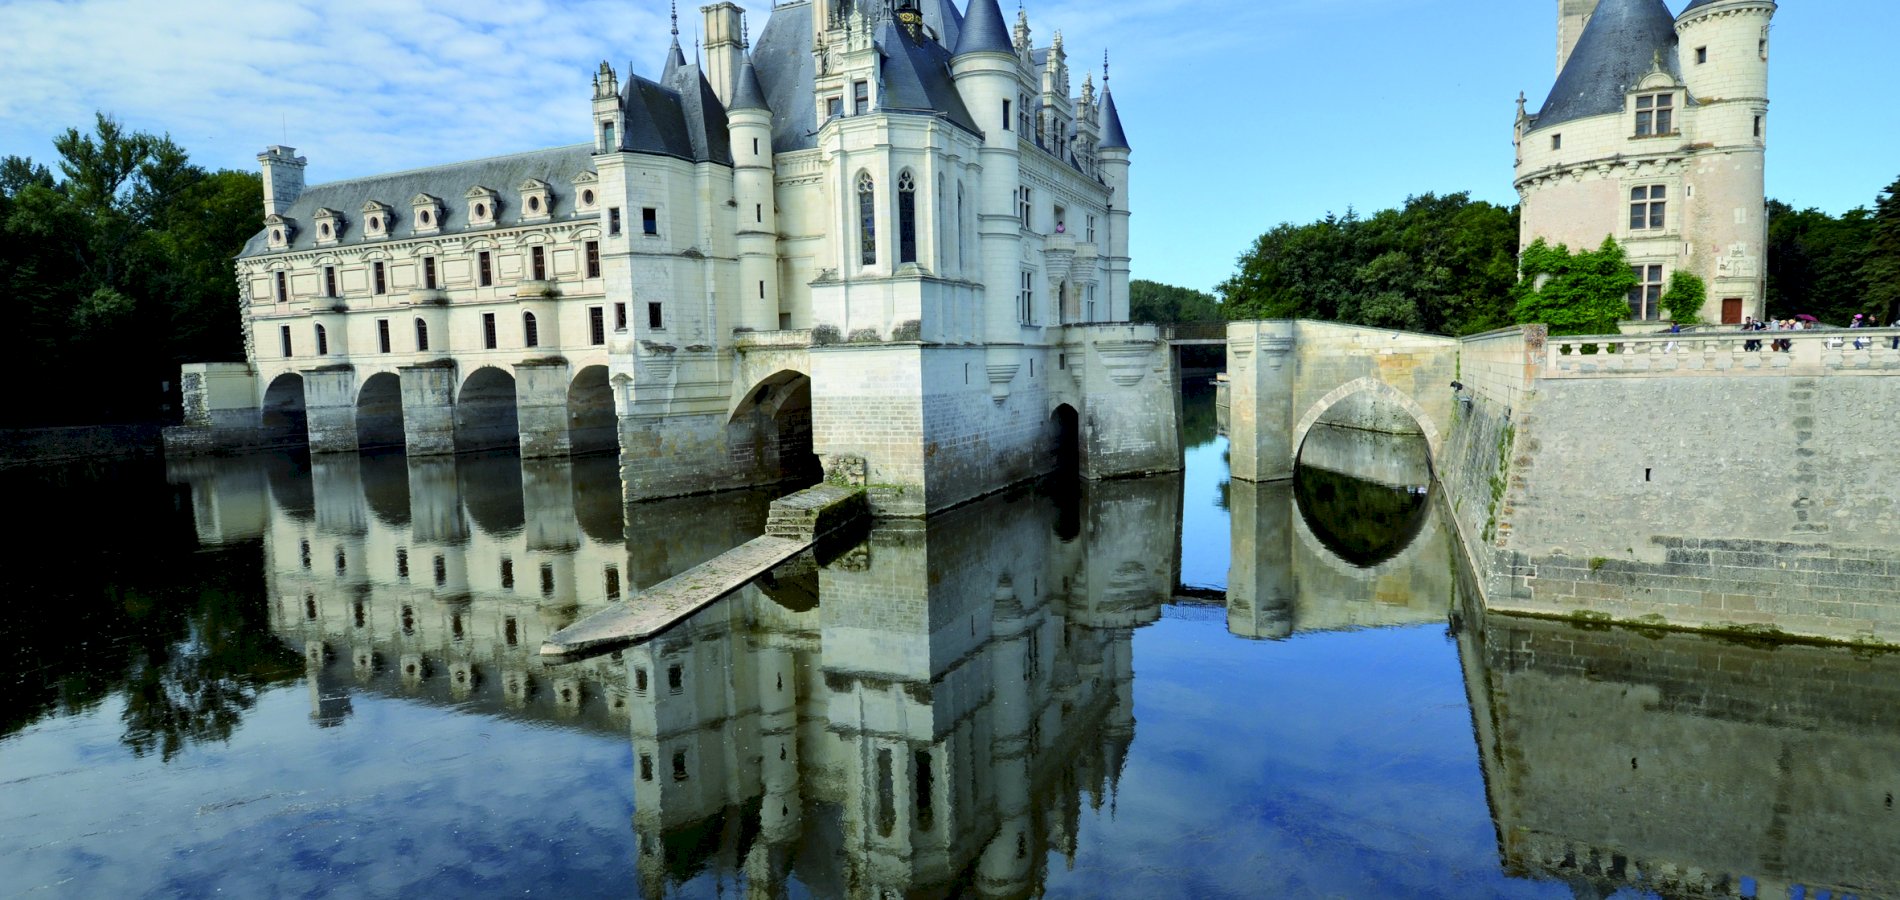 Ophorus Tours - 4 Days Small Group Loire Valley Travel Package - 3* Hotel Option